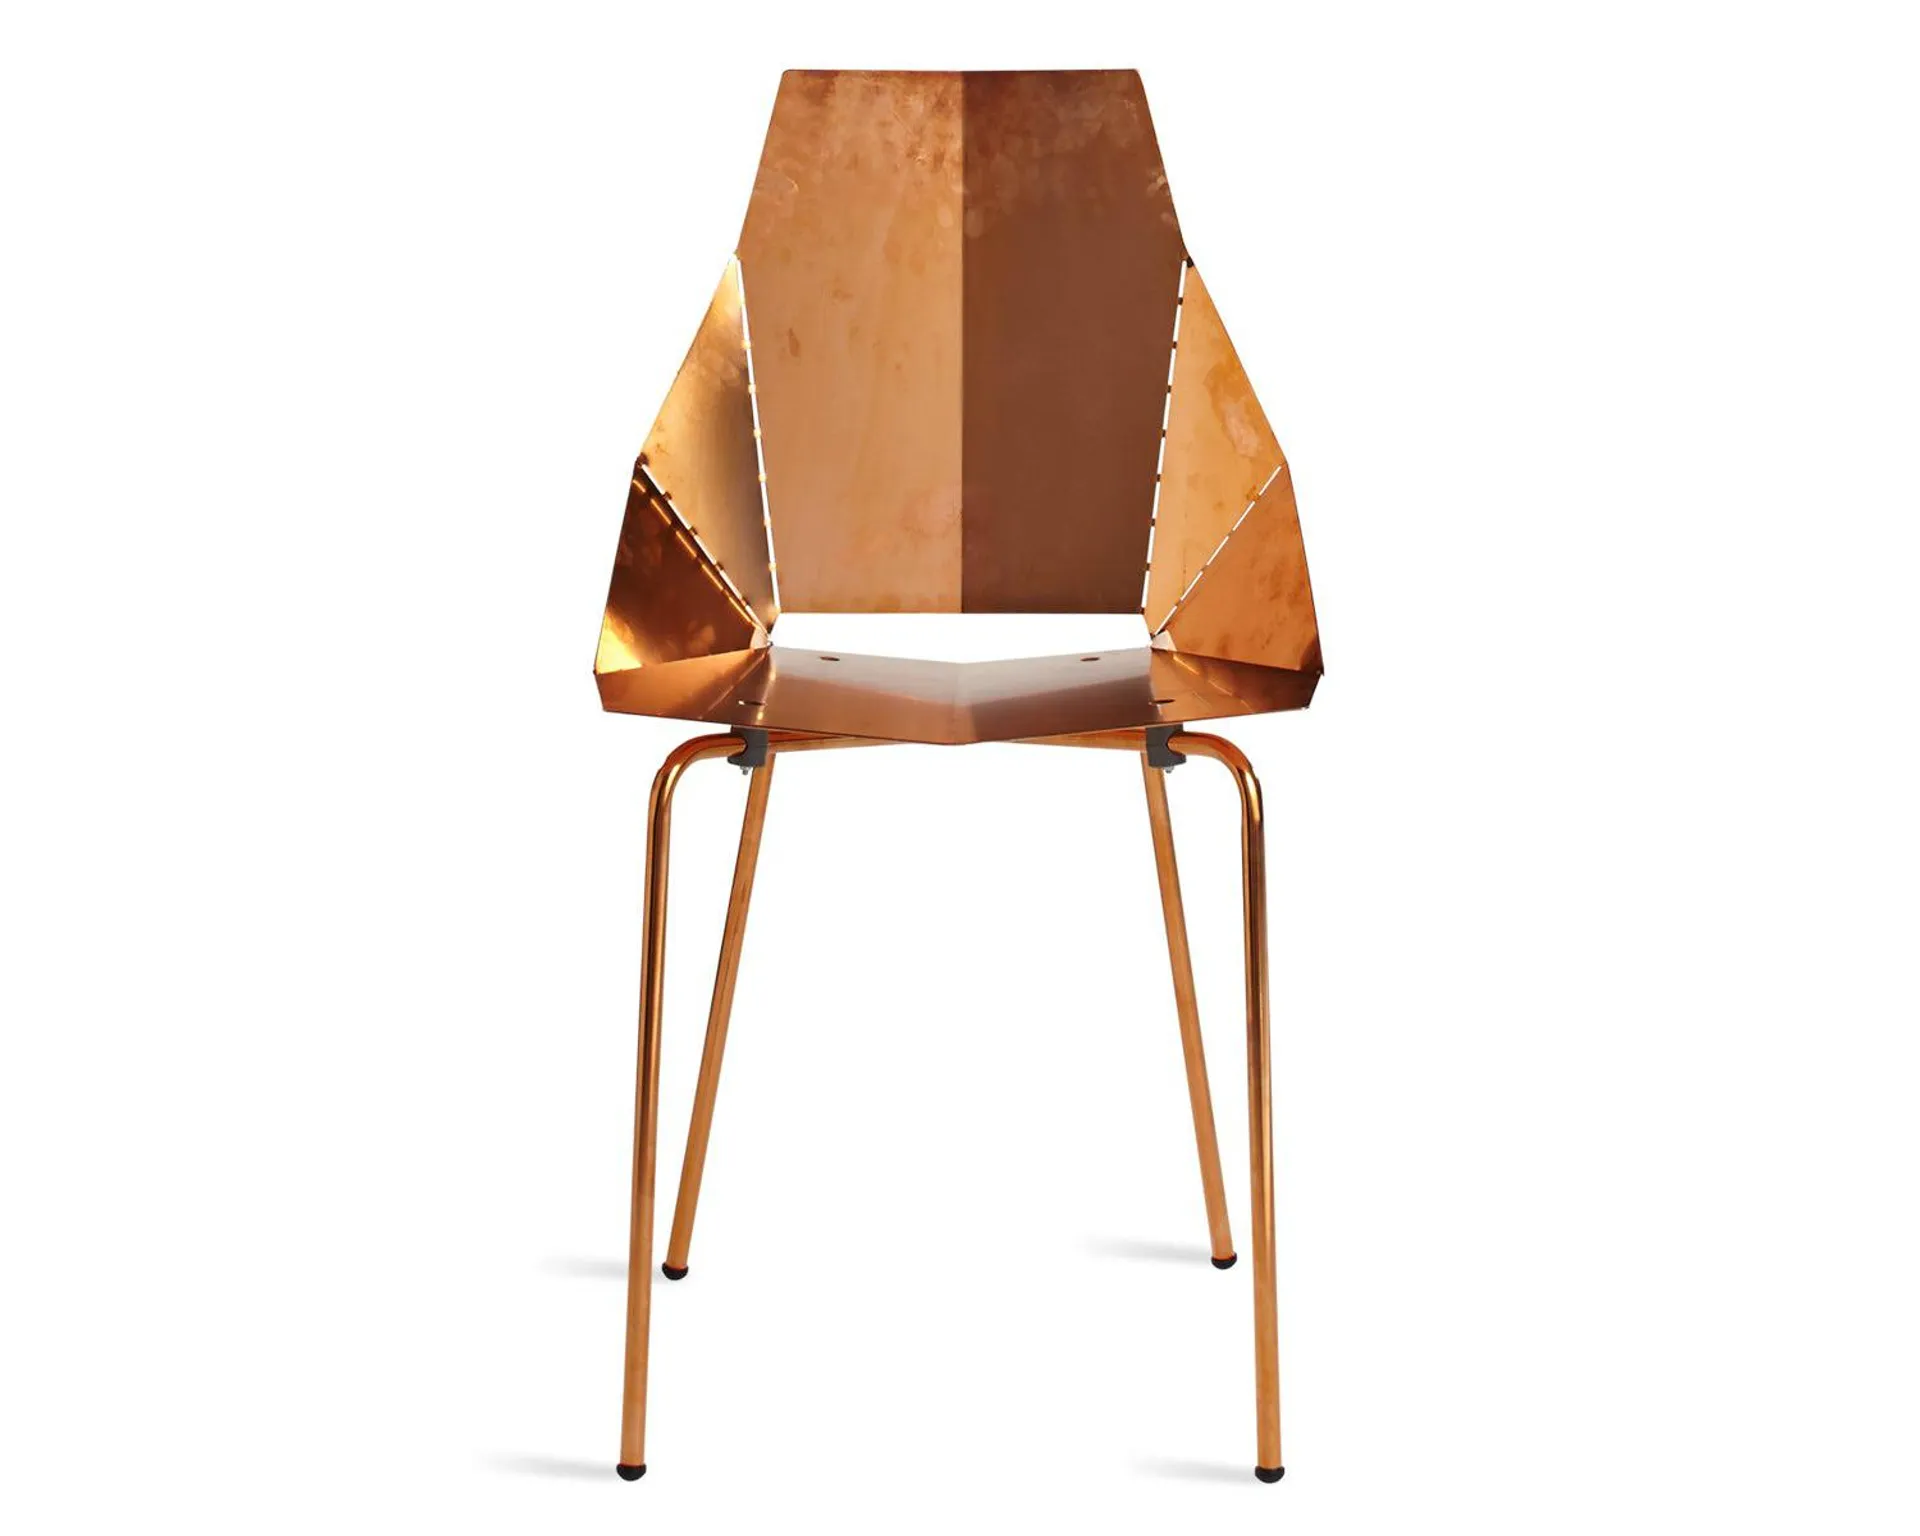 Real Good Chair - Copper